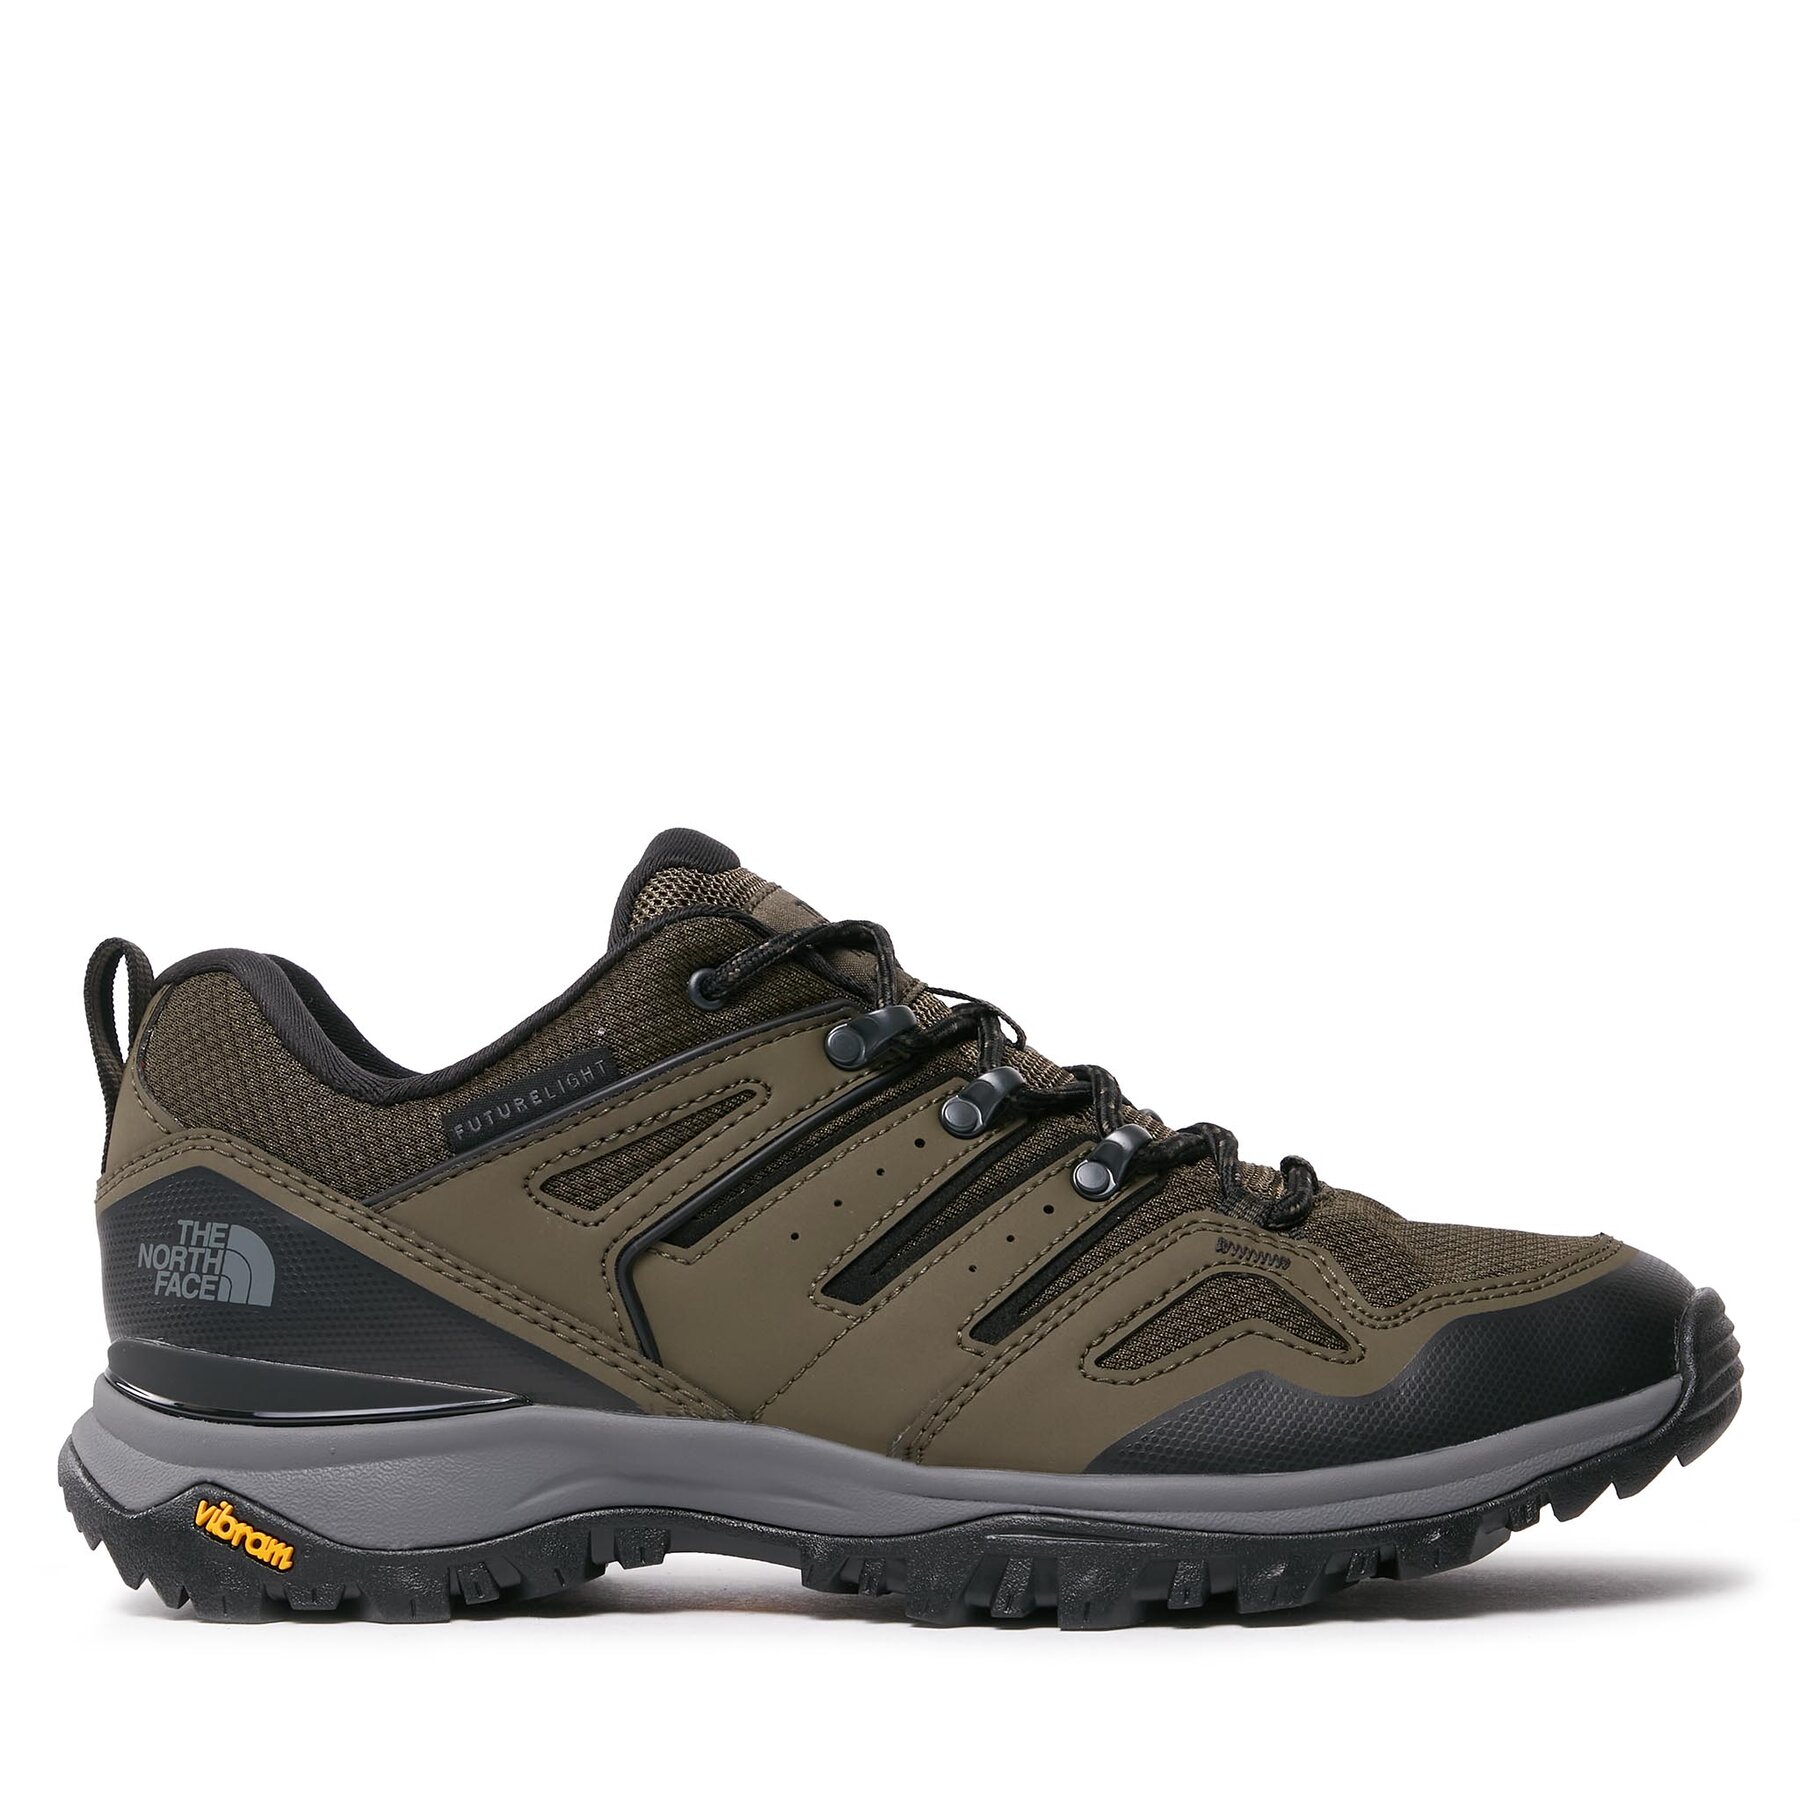 Trekkingschuhe The North Face M Hedgehog Futurelight (Eur)NF0A8AADBQW1 New Taupe Green/Tnf Black von The North Face